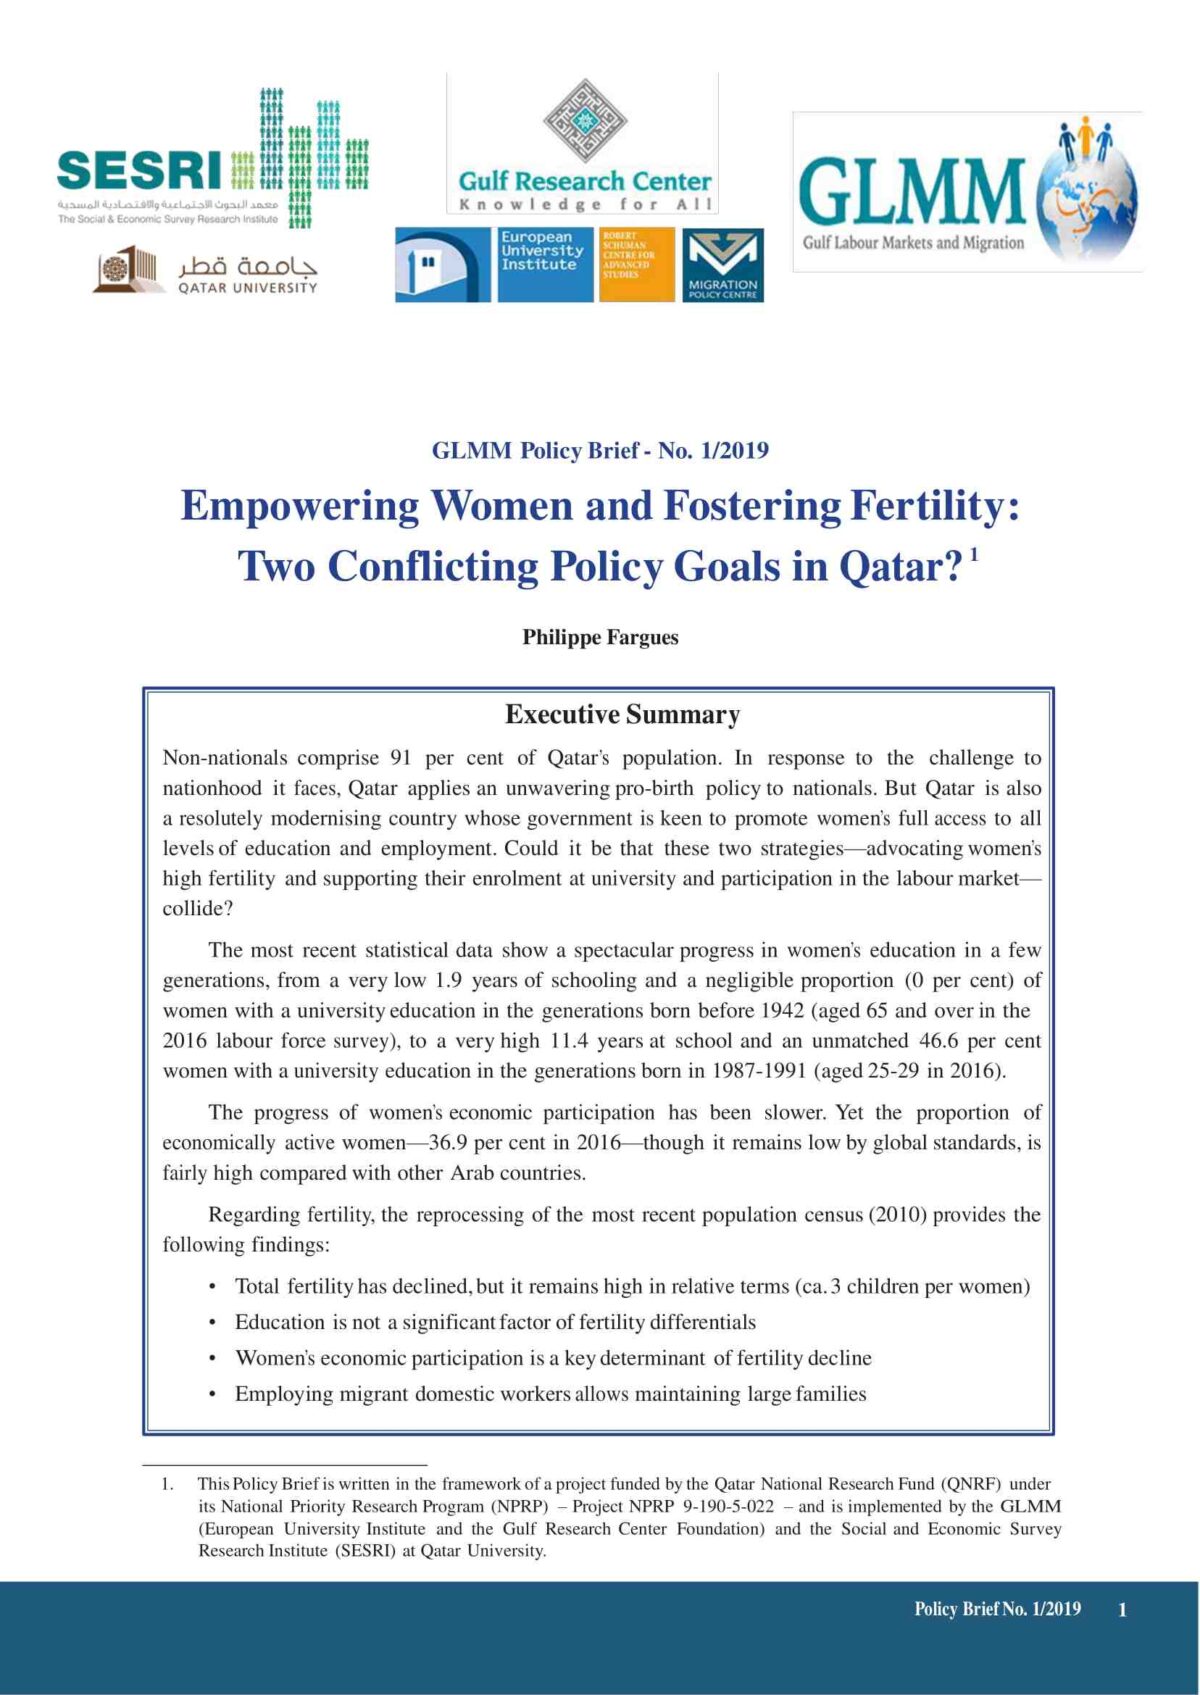 Empowering Women and Fostering Fertility: Two Conflicting Policy Goals in Qatar?